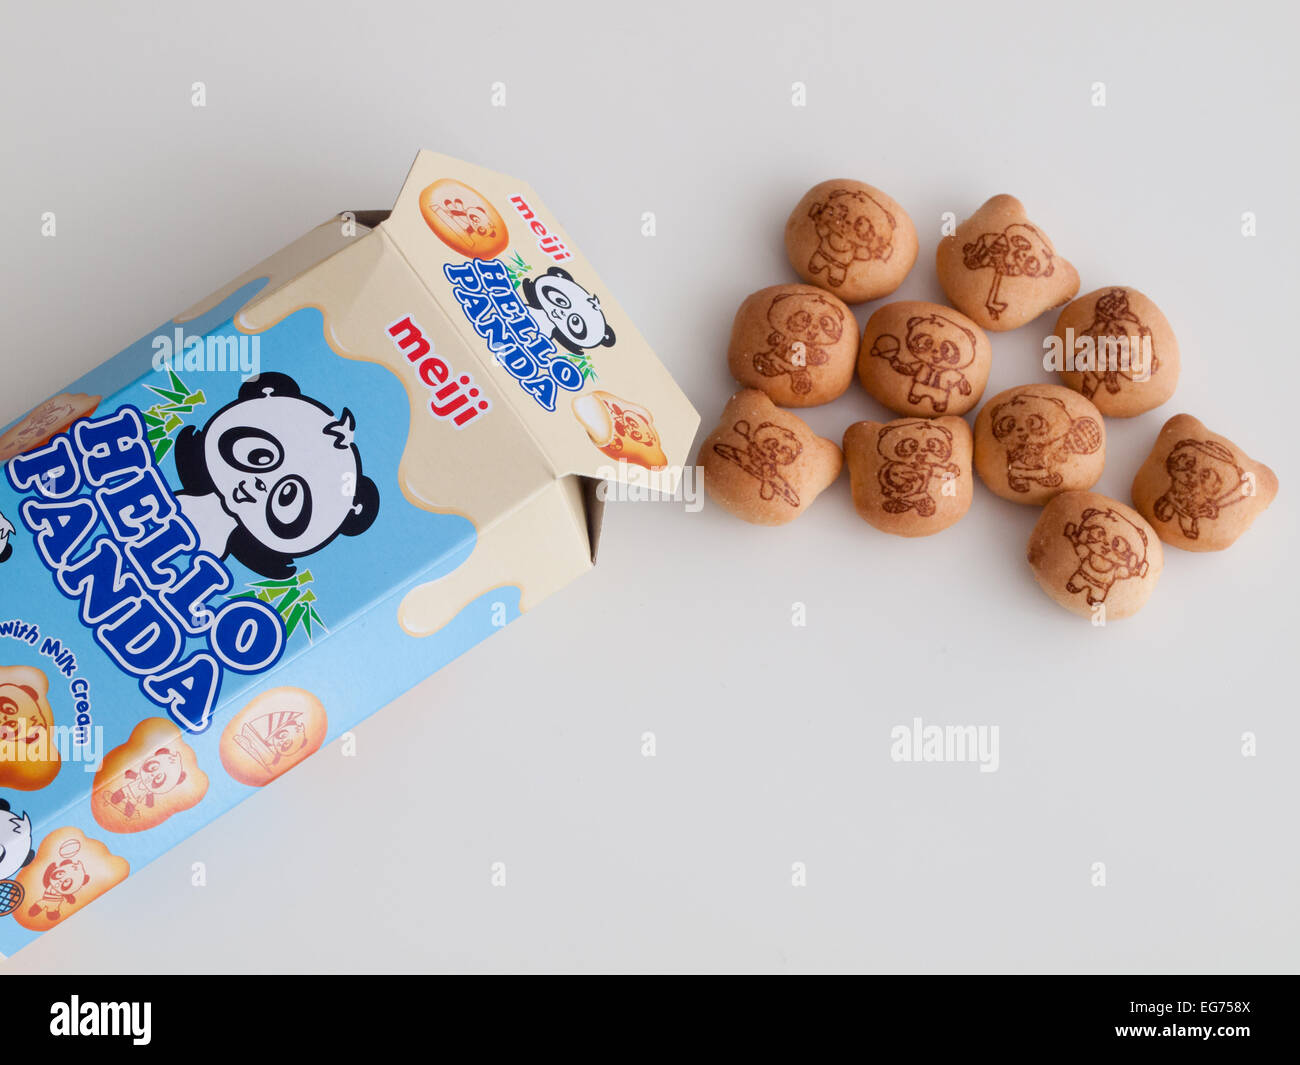 A package of Hello Panda biscuits. Hello Panda is a brand of Japanese  biscuit, manufactured by Meiji Seika Stock Photo - Alamy